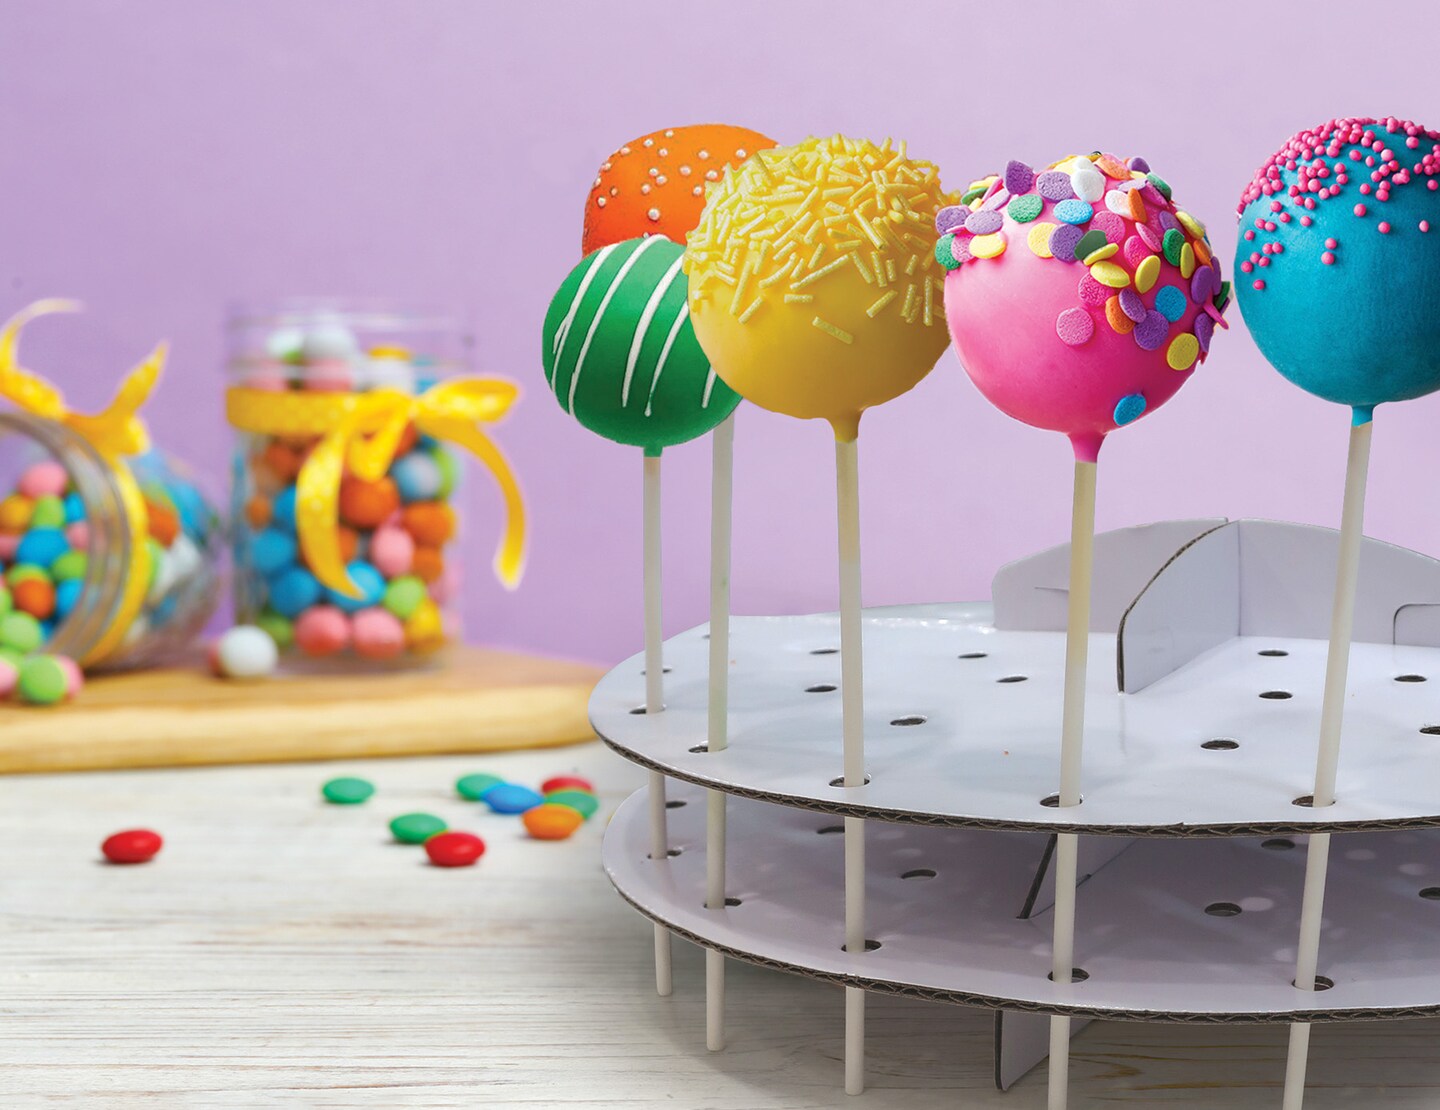 Sntieecr 35 Holes Rainbow Wooden Cake Pop Stand Lollipop Holder for Dessert  Table Cake Pop Display Stand for Birthday Parties Weddings Baby Showers  Anniversaries : Amazon.in: Home & Kitchen